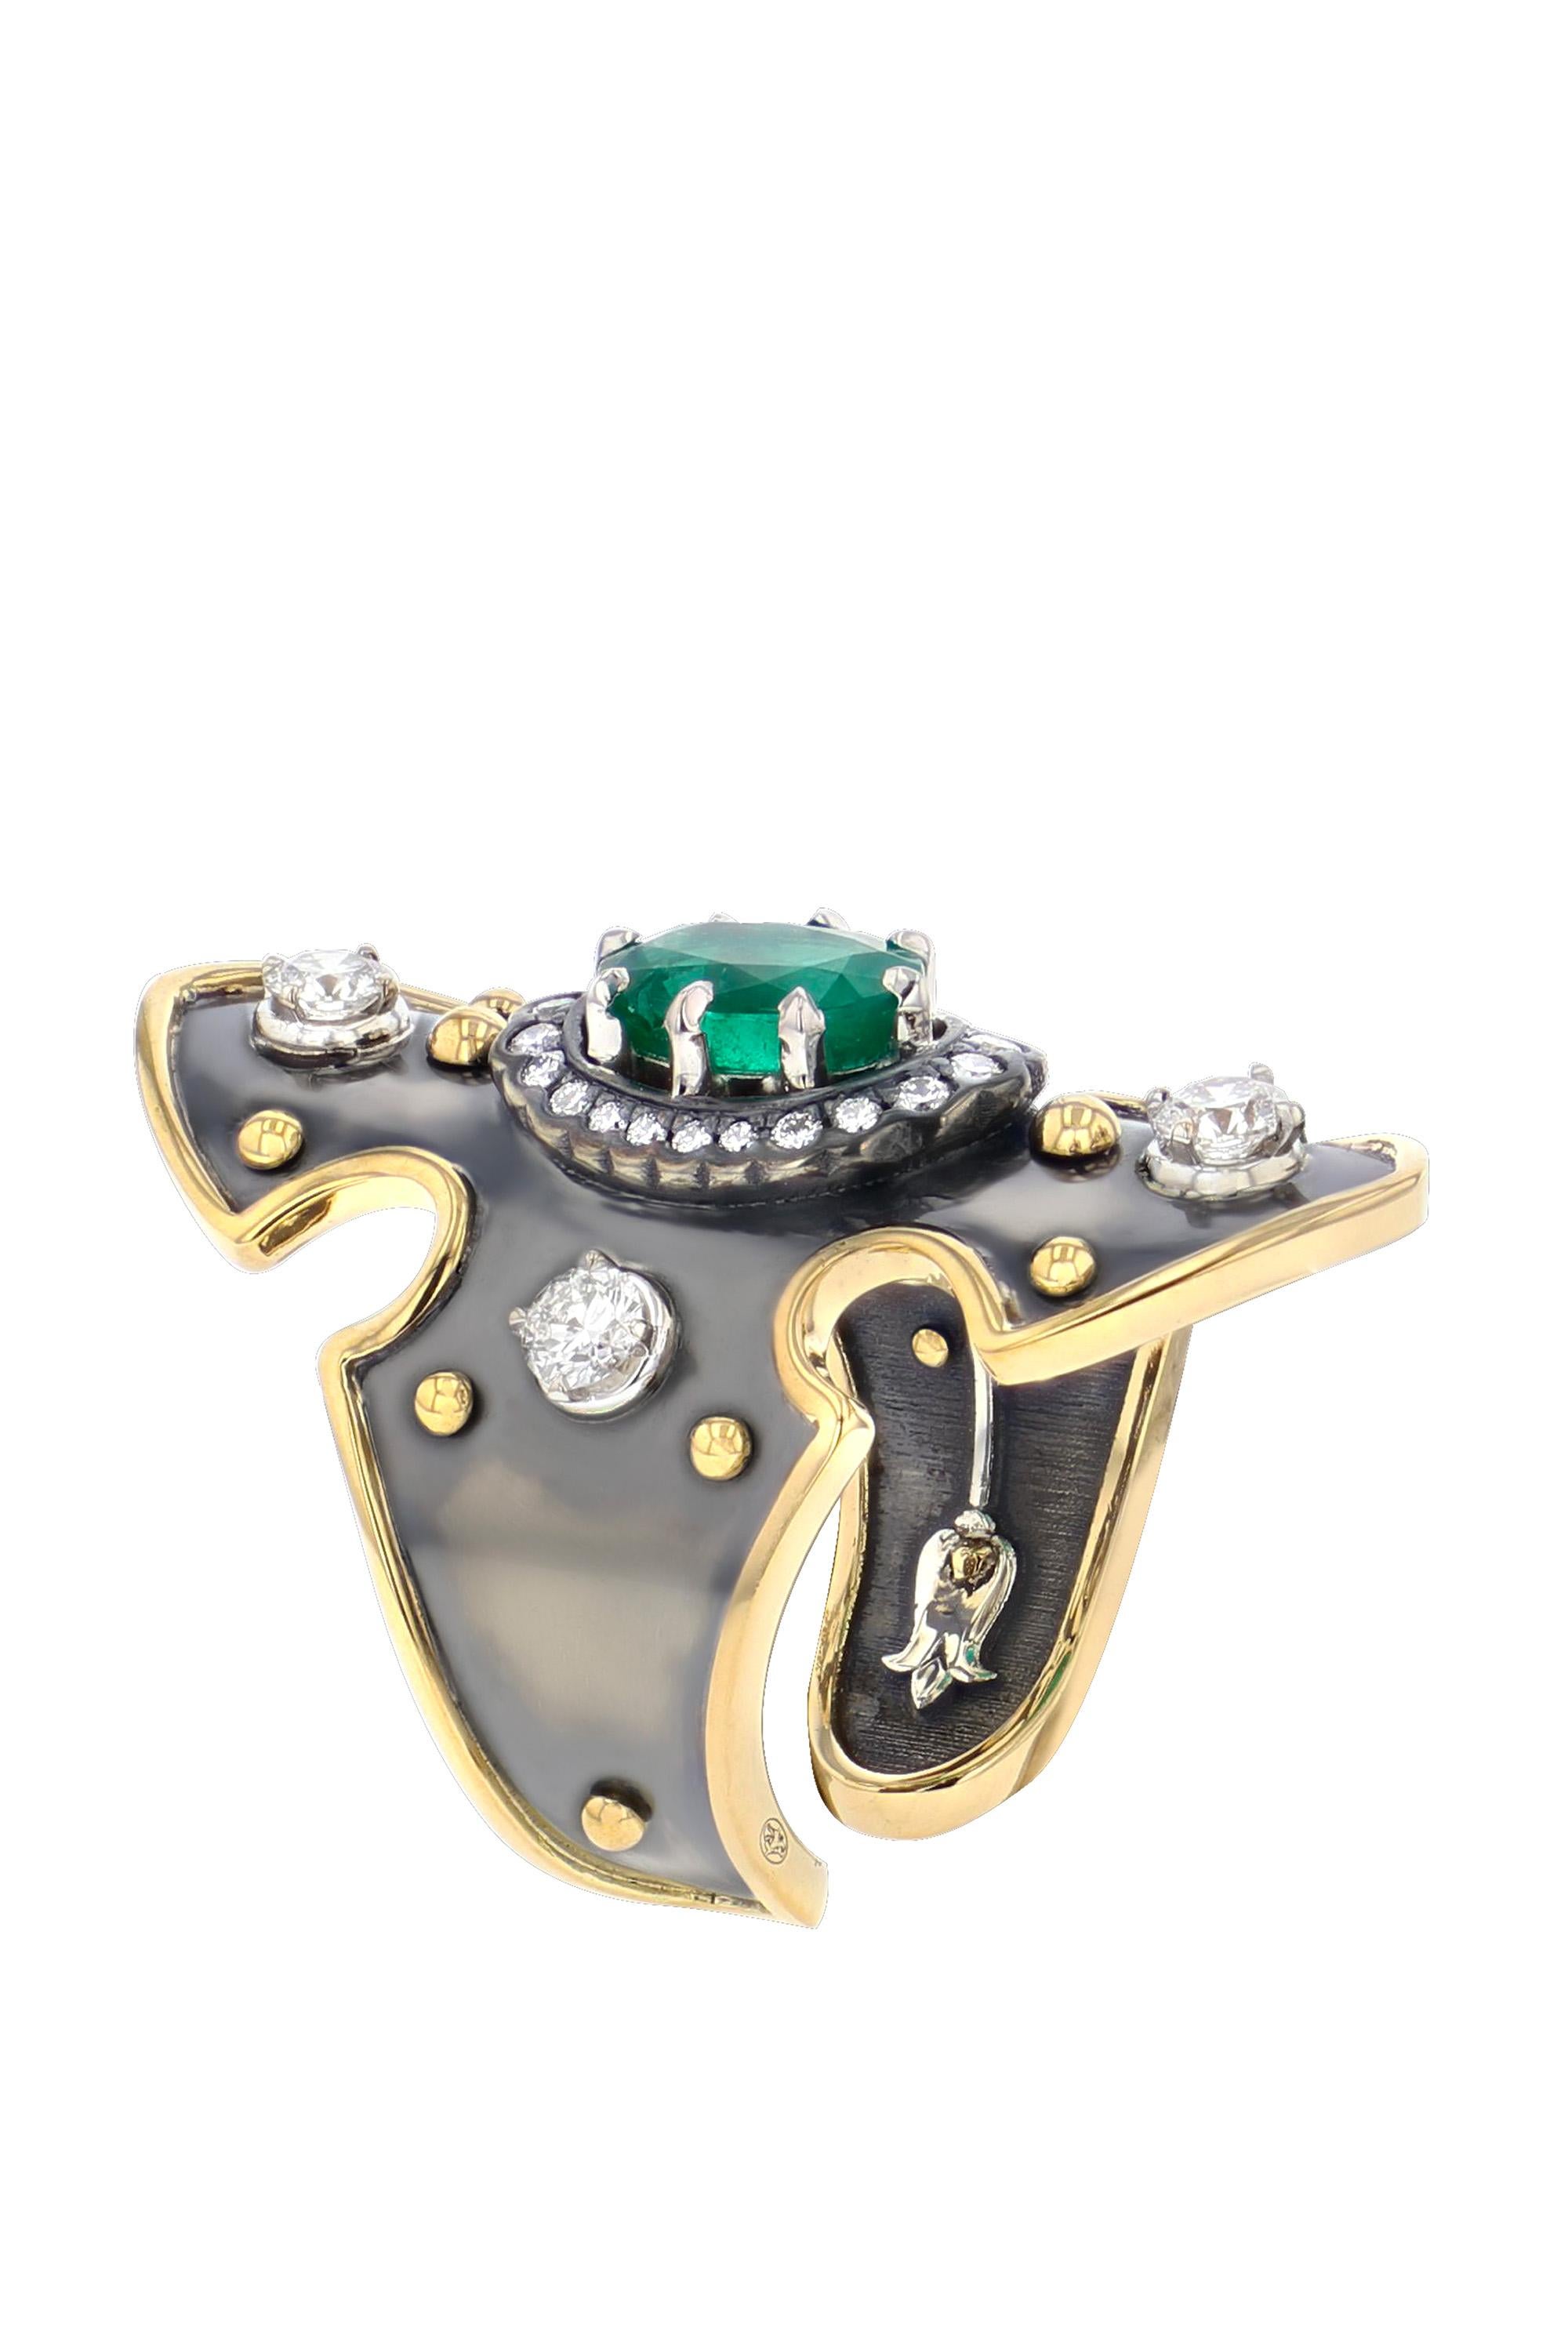 Yellow gold and distressed silver ring studded with an oval emerald surrounded by diamonds.

Details:
Oval Emerald: 8x6x1.3 cts  
26 Diamonds: 0.57 cts
18k Gold: 5g 
Distressed Silver: 6.5g  
Made in France